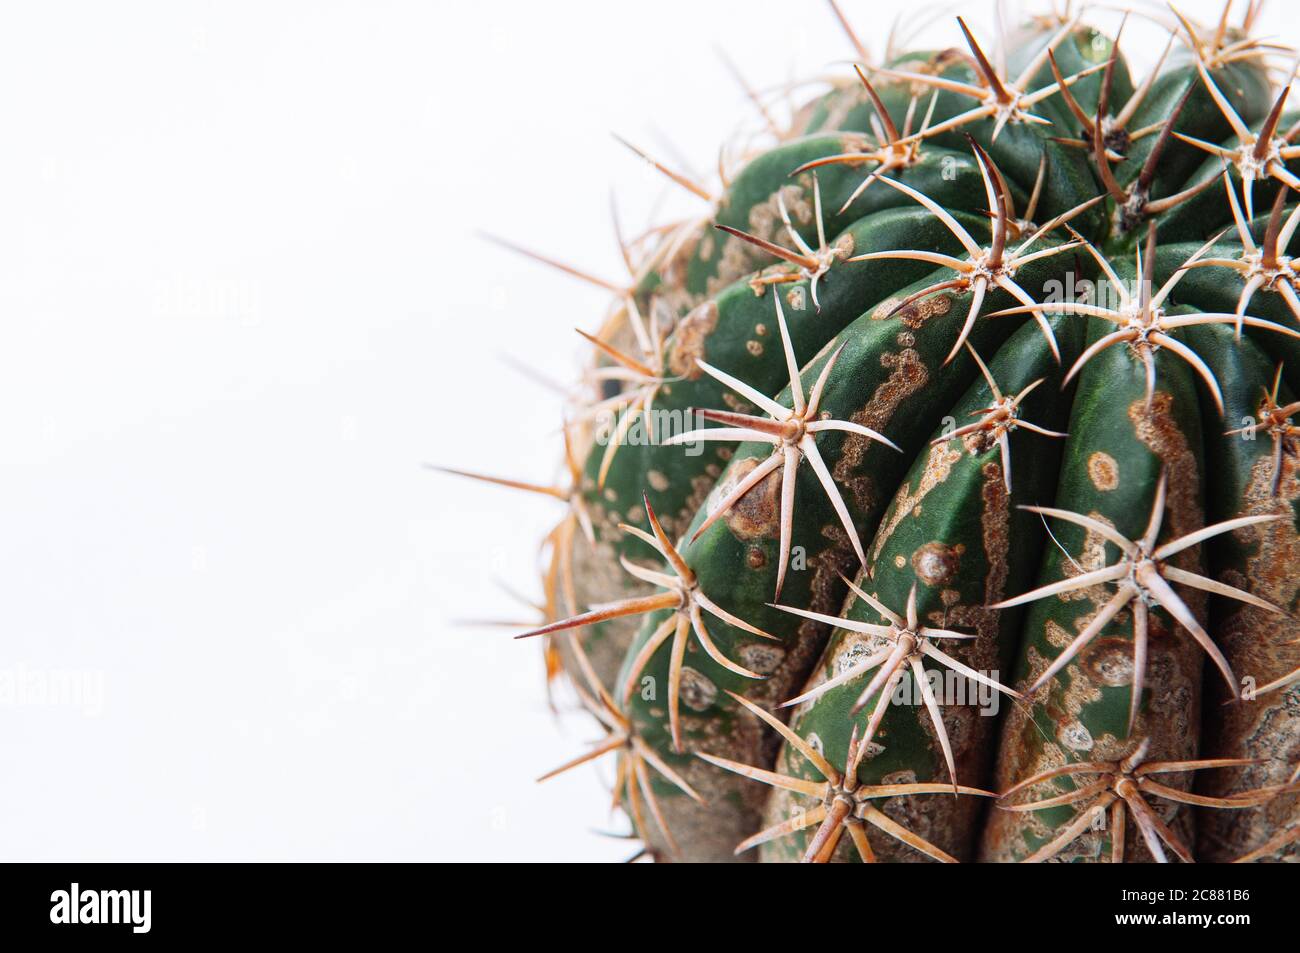 Cactus disease dry root rot caused by fungi, severe damage fungi infected Melocactus isolated on white background showing serious damage on skin Stock Photo